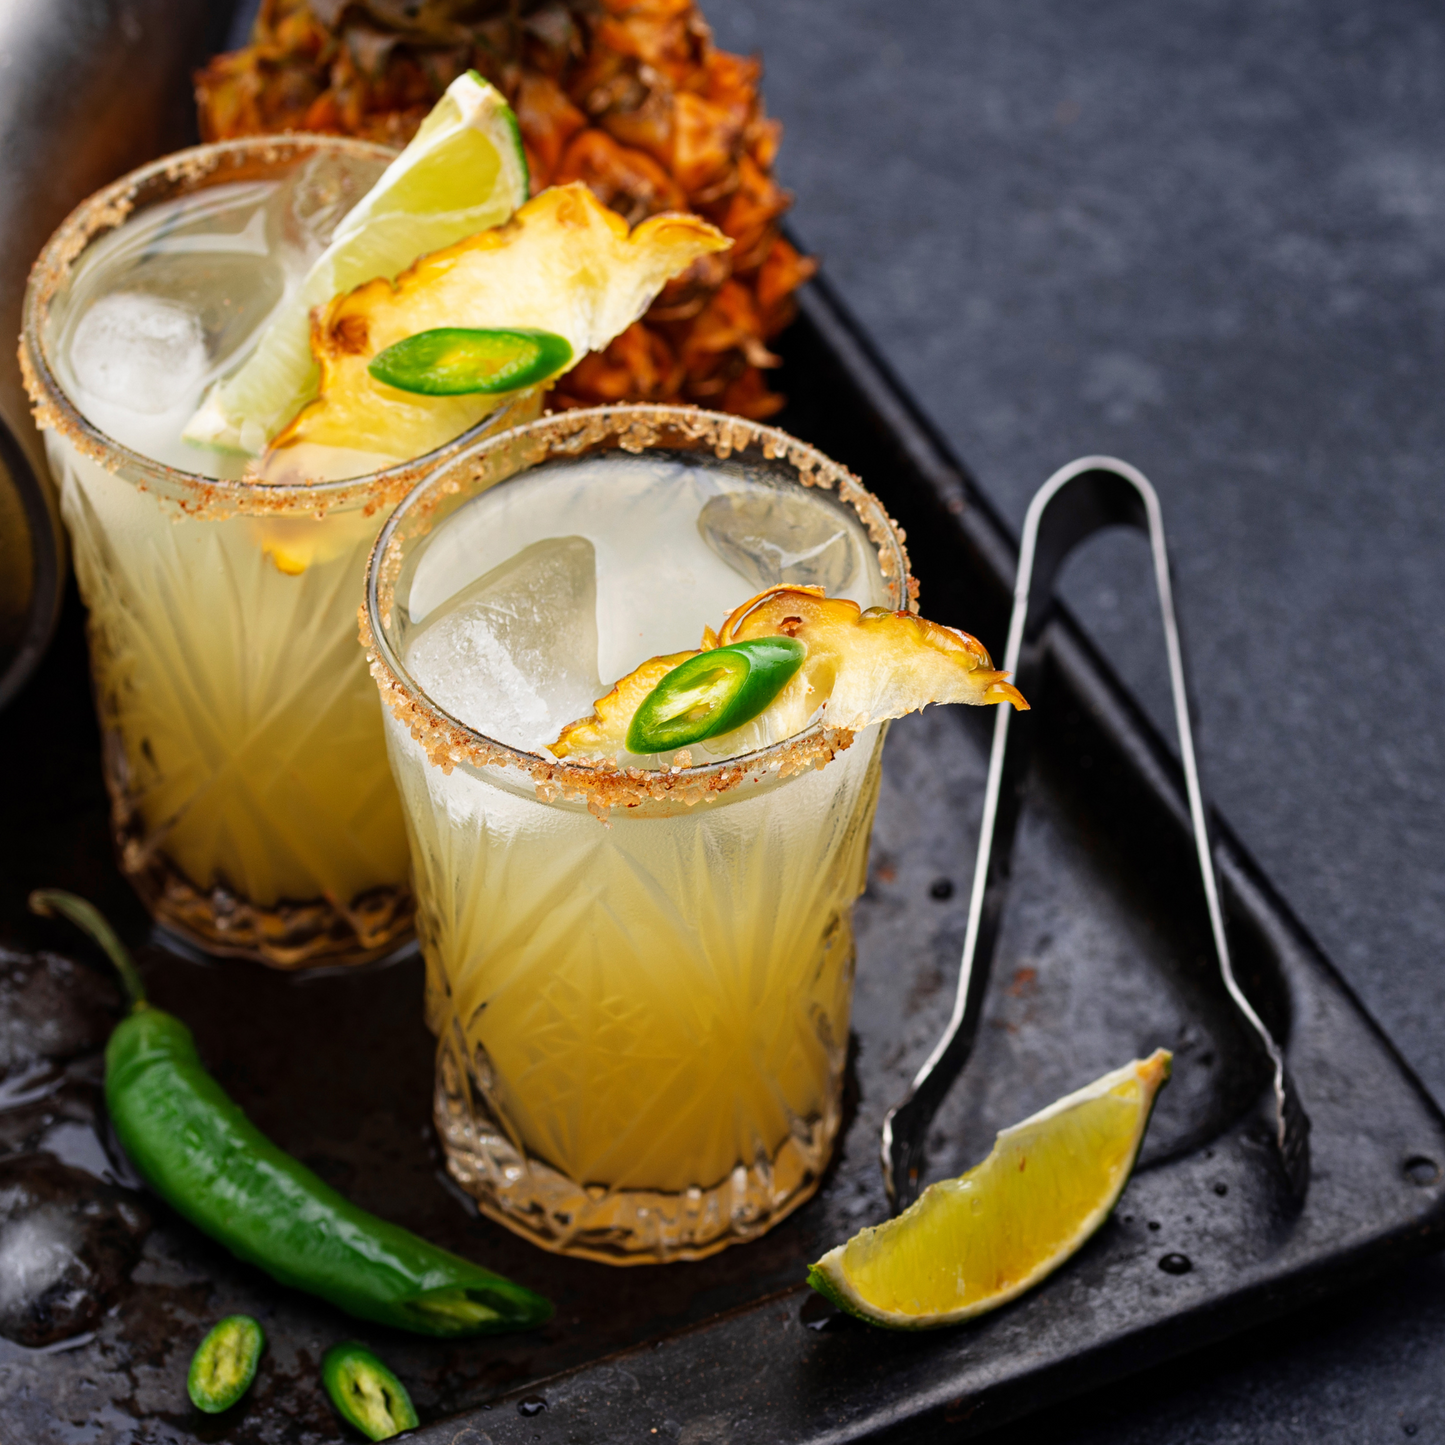 Spice Up Your Life with Hive Craft's Spicy Margarita: A Fiery Twist on a Classic